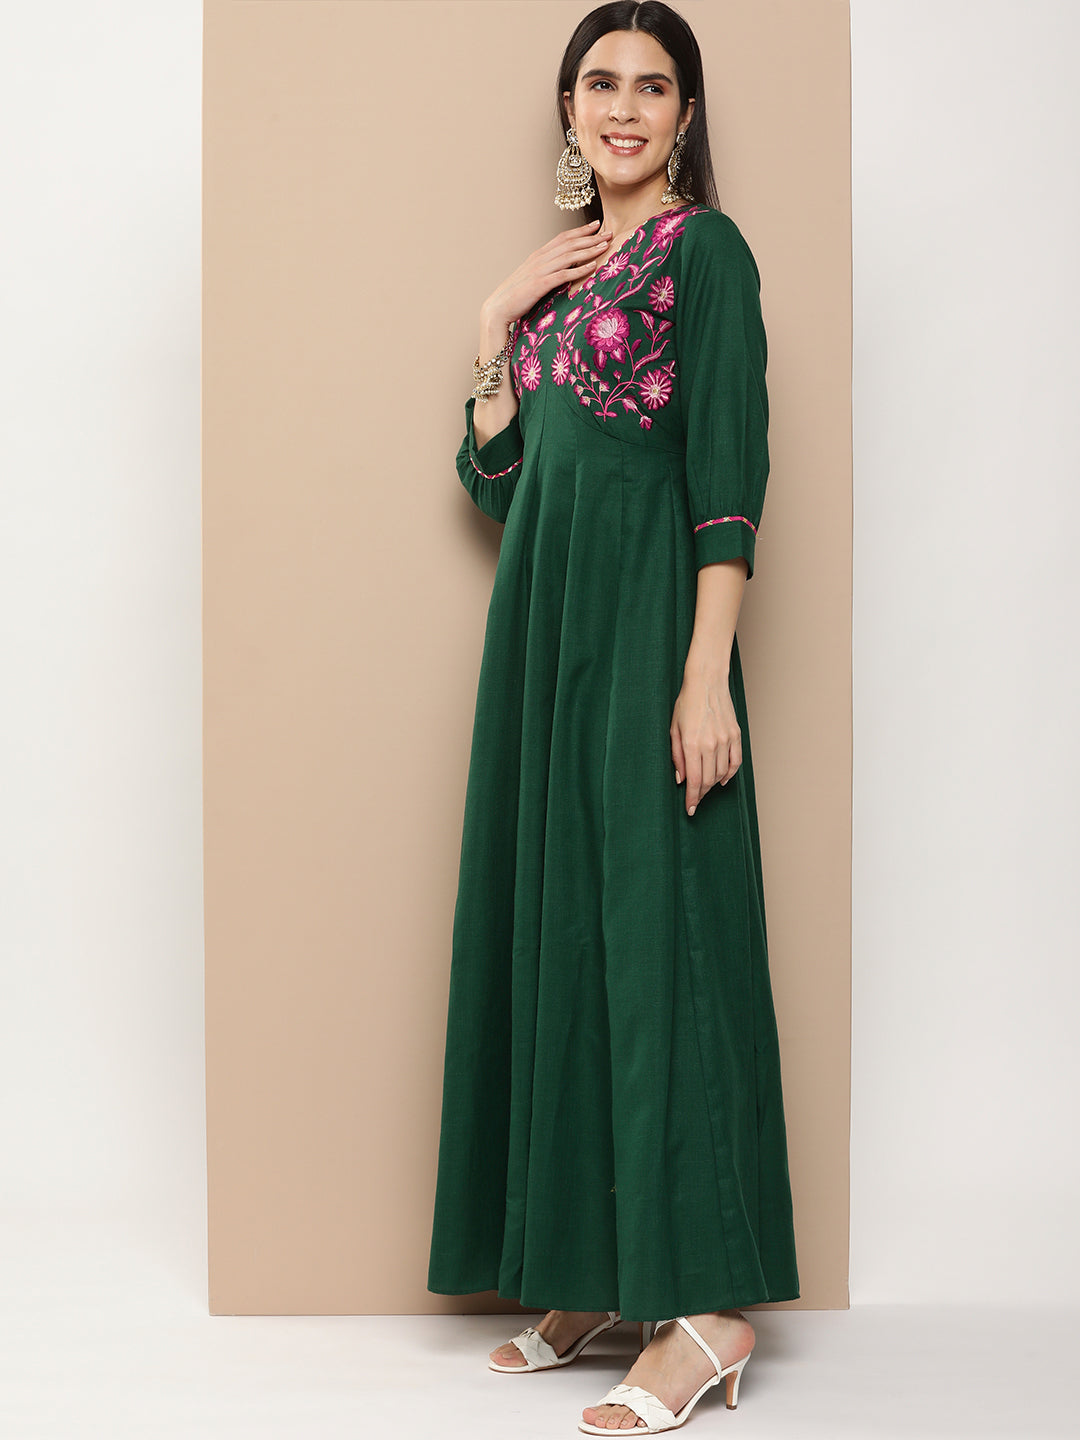 Women's Green Embroidered Long Dress With Waist Belt - Bhama Couture